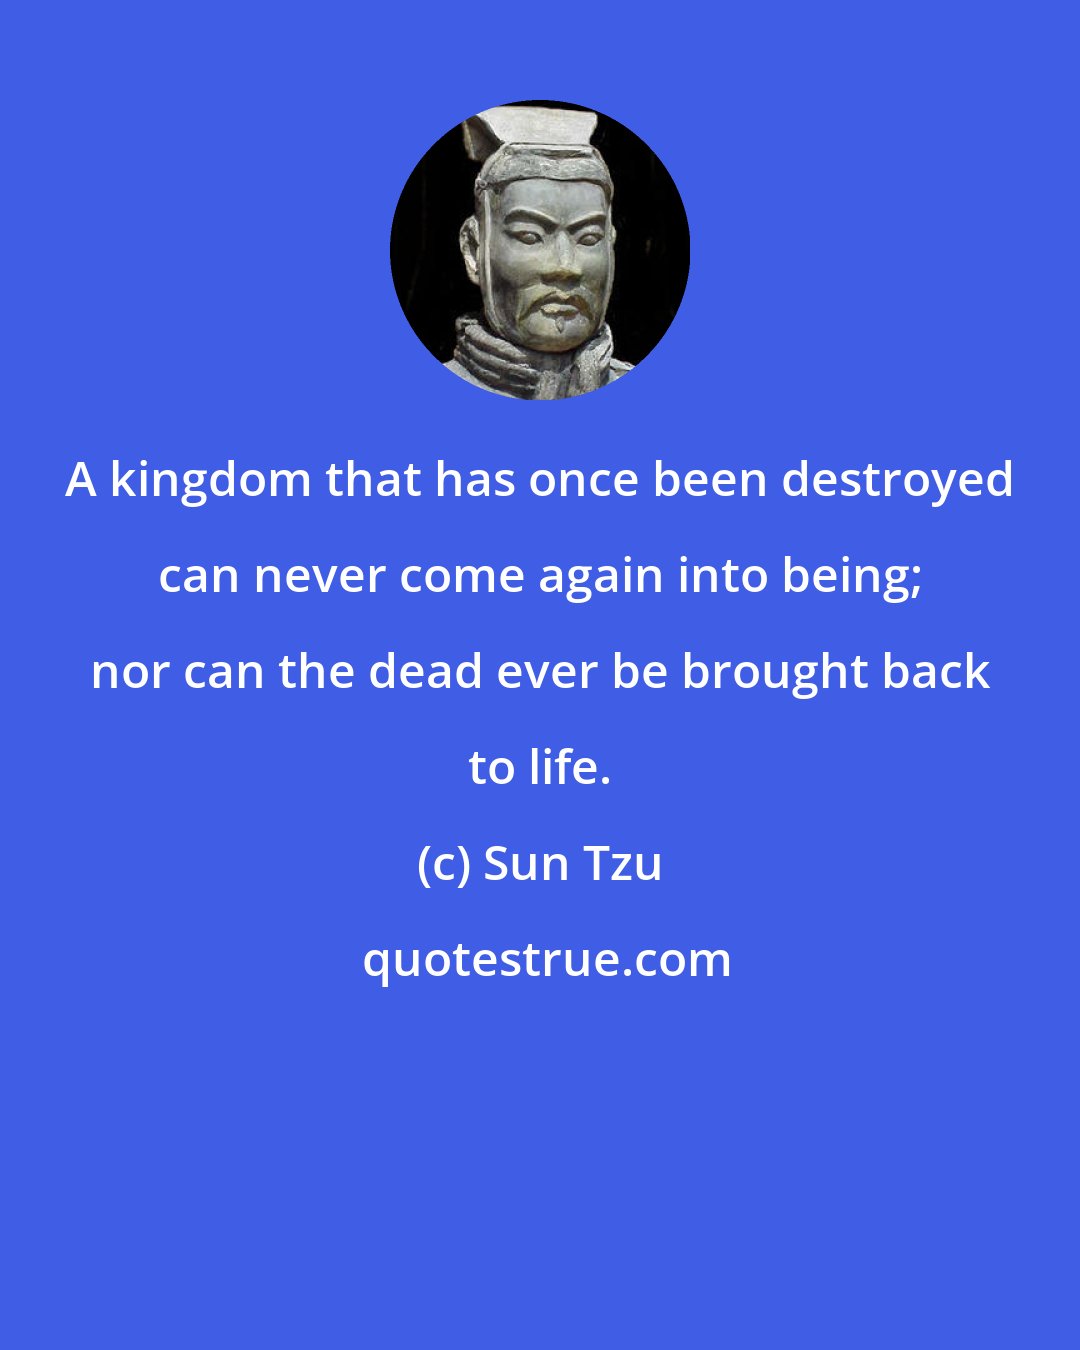 Sun Tzu: A kingdom that has once been destroyed can never come again into being; nor can the dead ever be brought back to life.